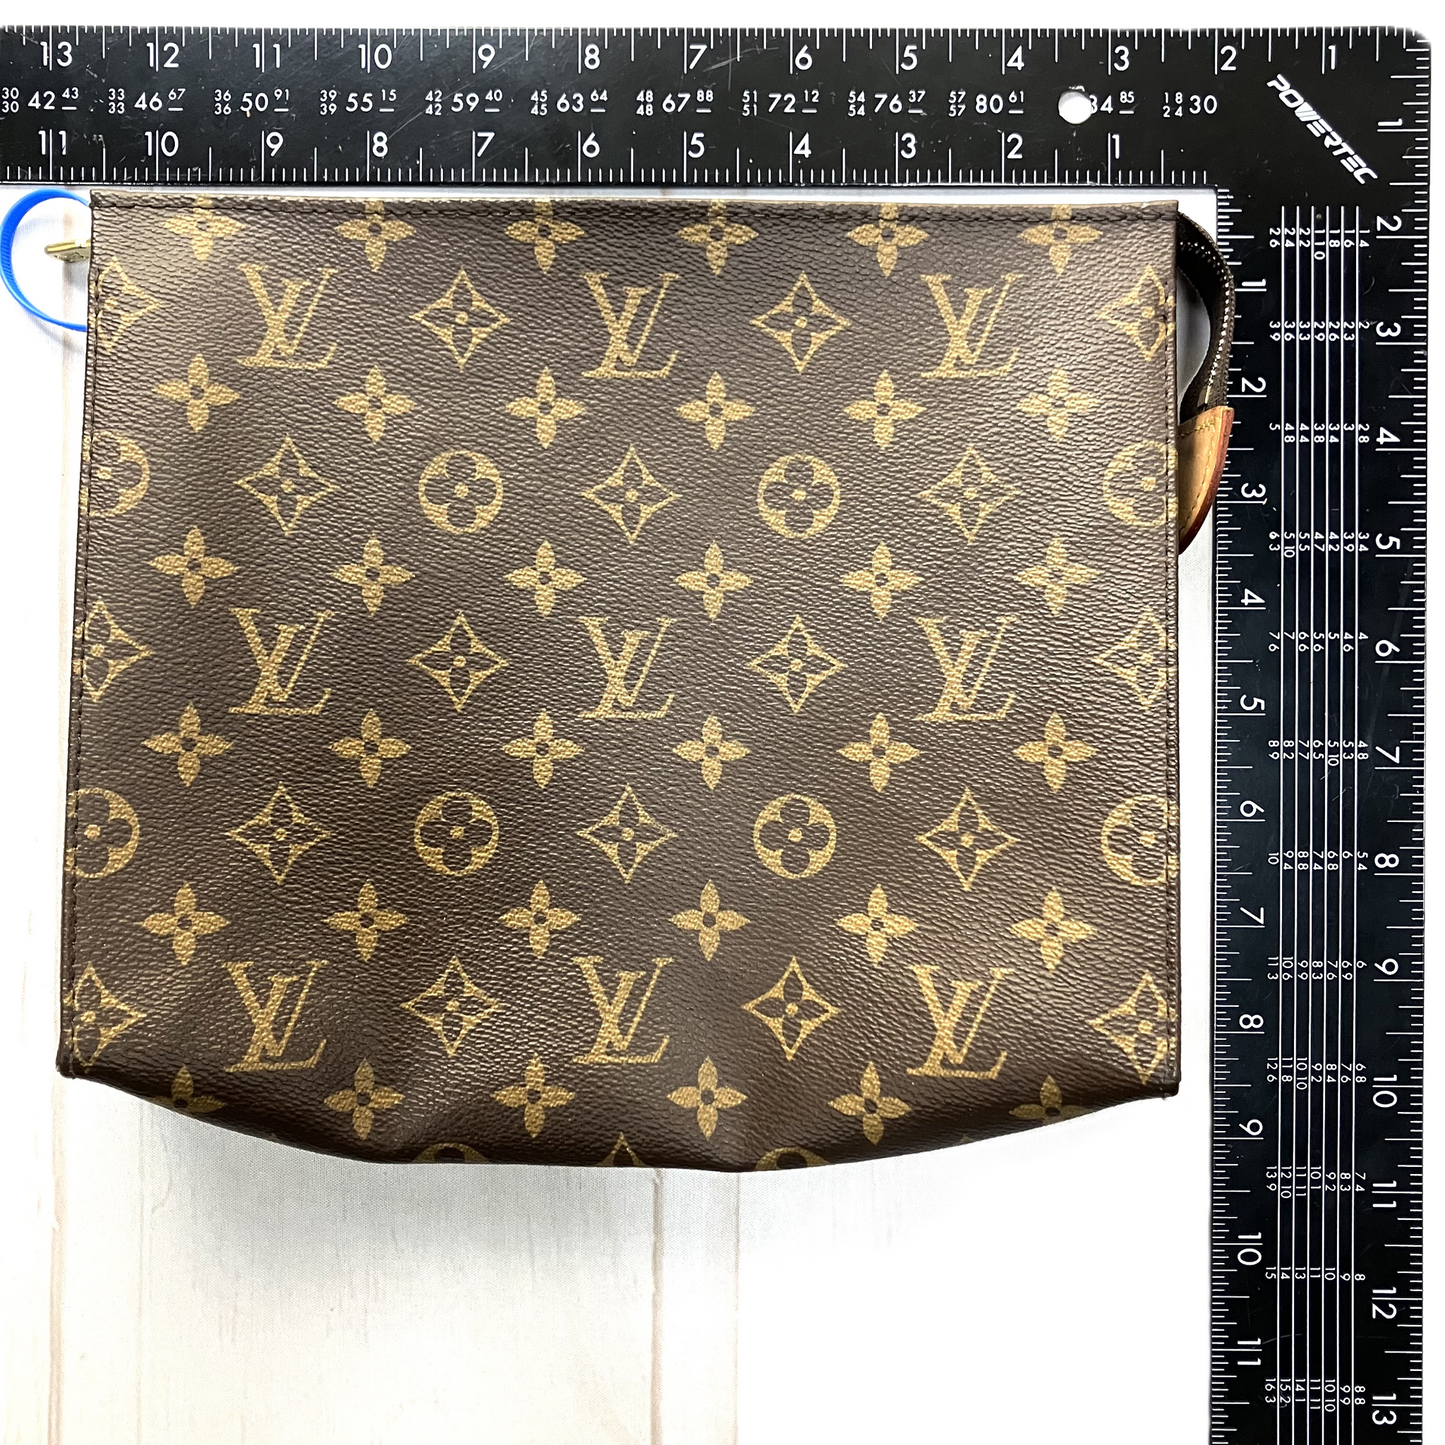 Clutch Luxury Designer By Louis Vuitton, Size: Small